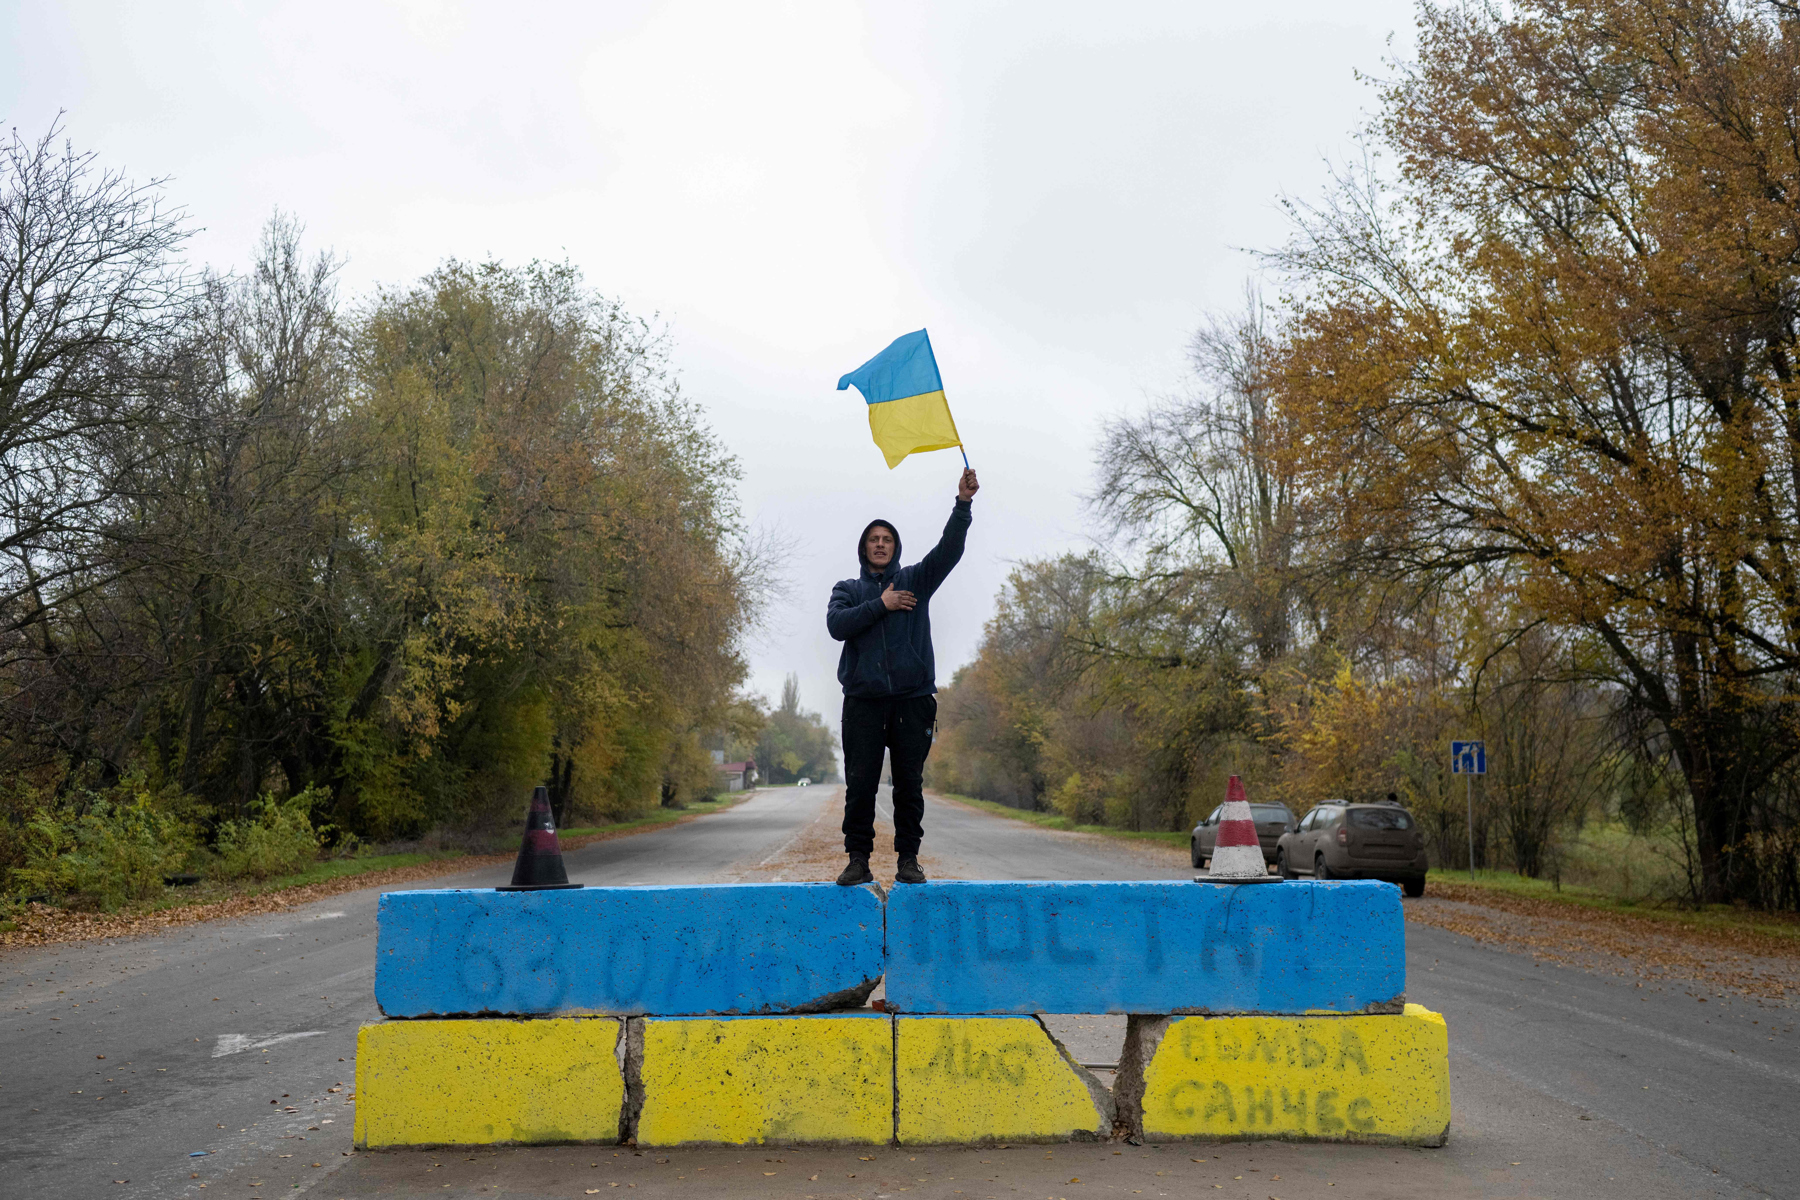 Ukraine war latest: Russians mined 'nearly everything' in now-liberated Kherson, says governor